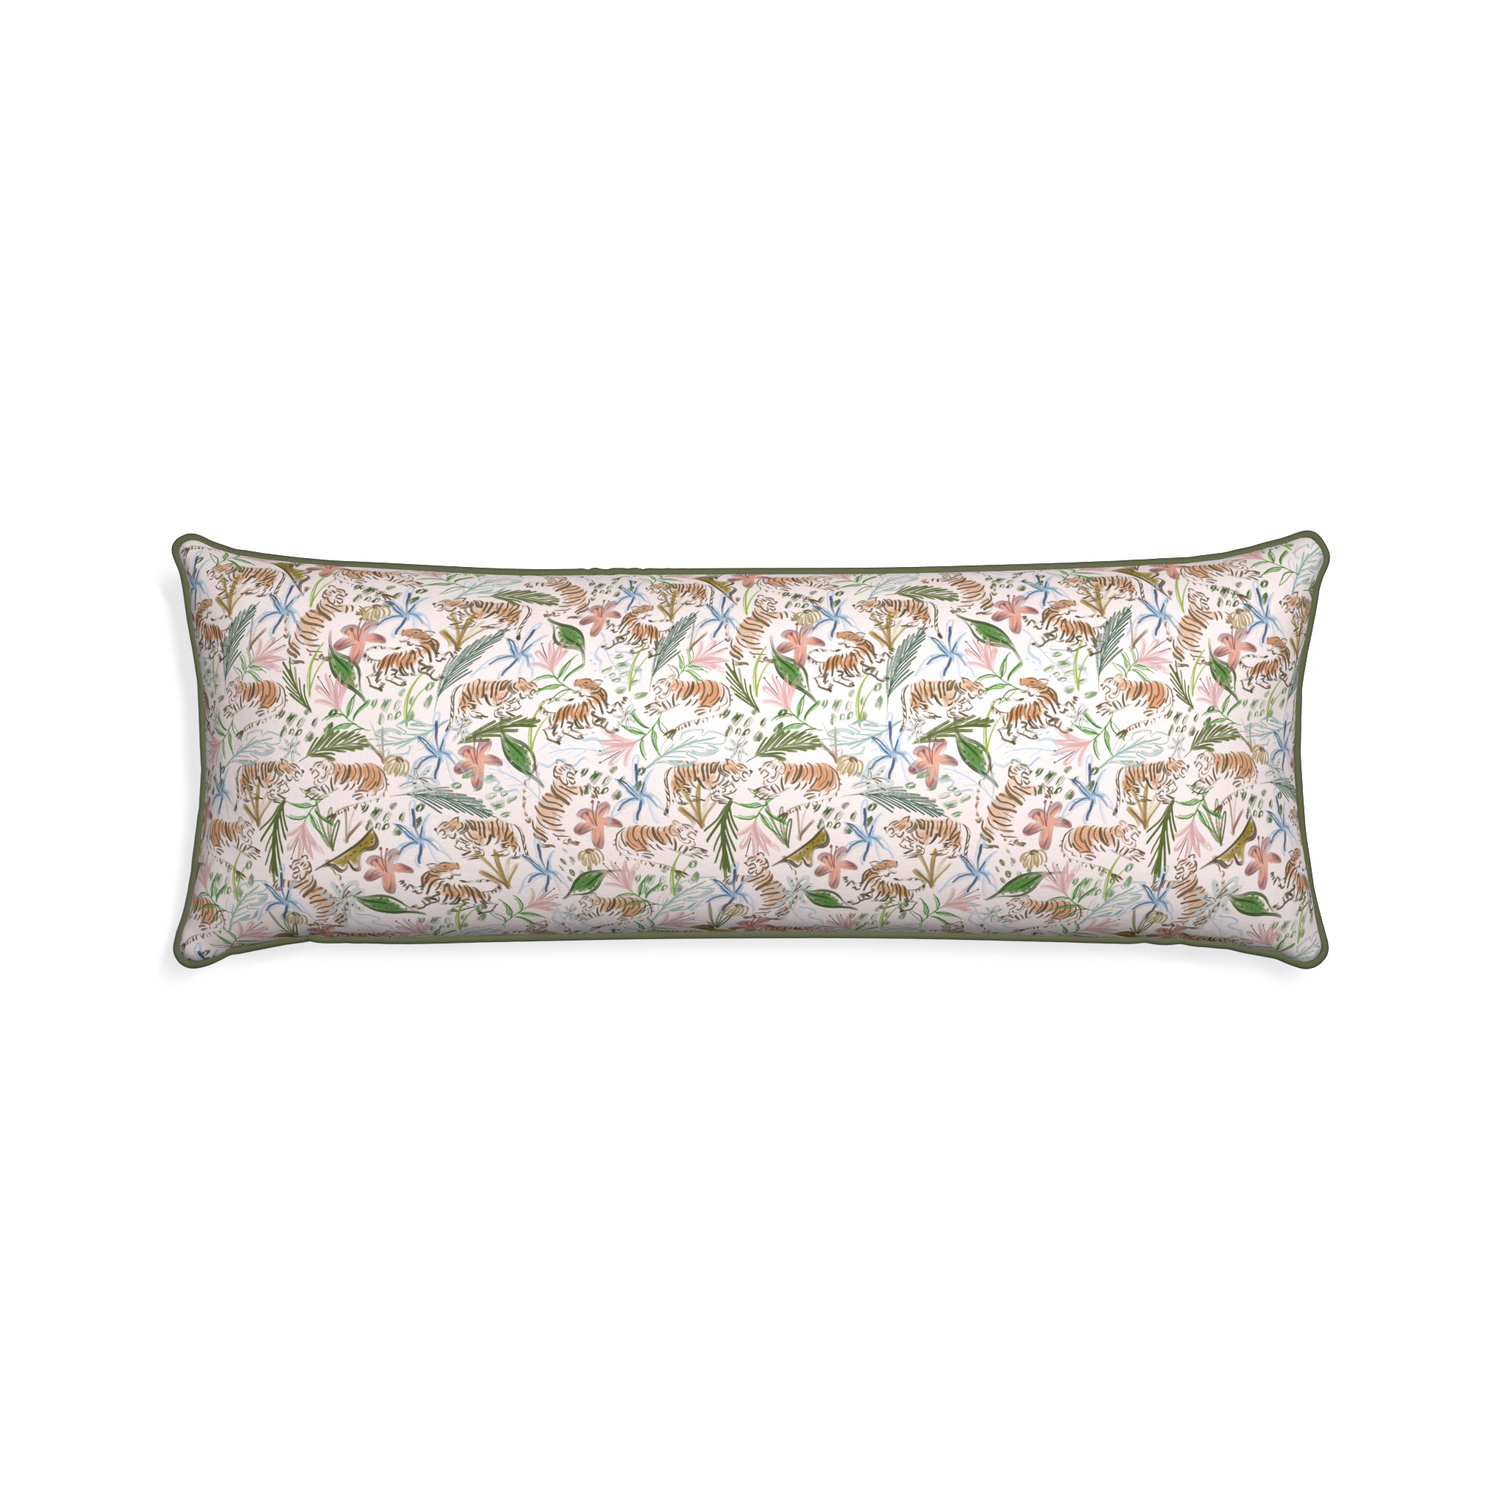 Xl-lumbar frida pink custom pink chinoiserie tigerpillow with f piping on white background